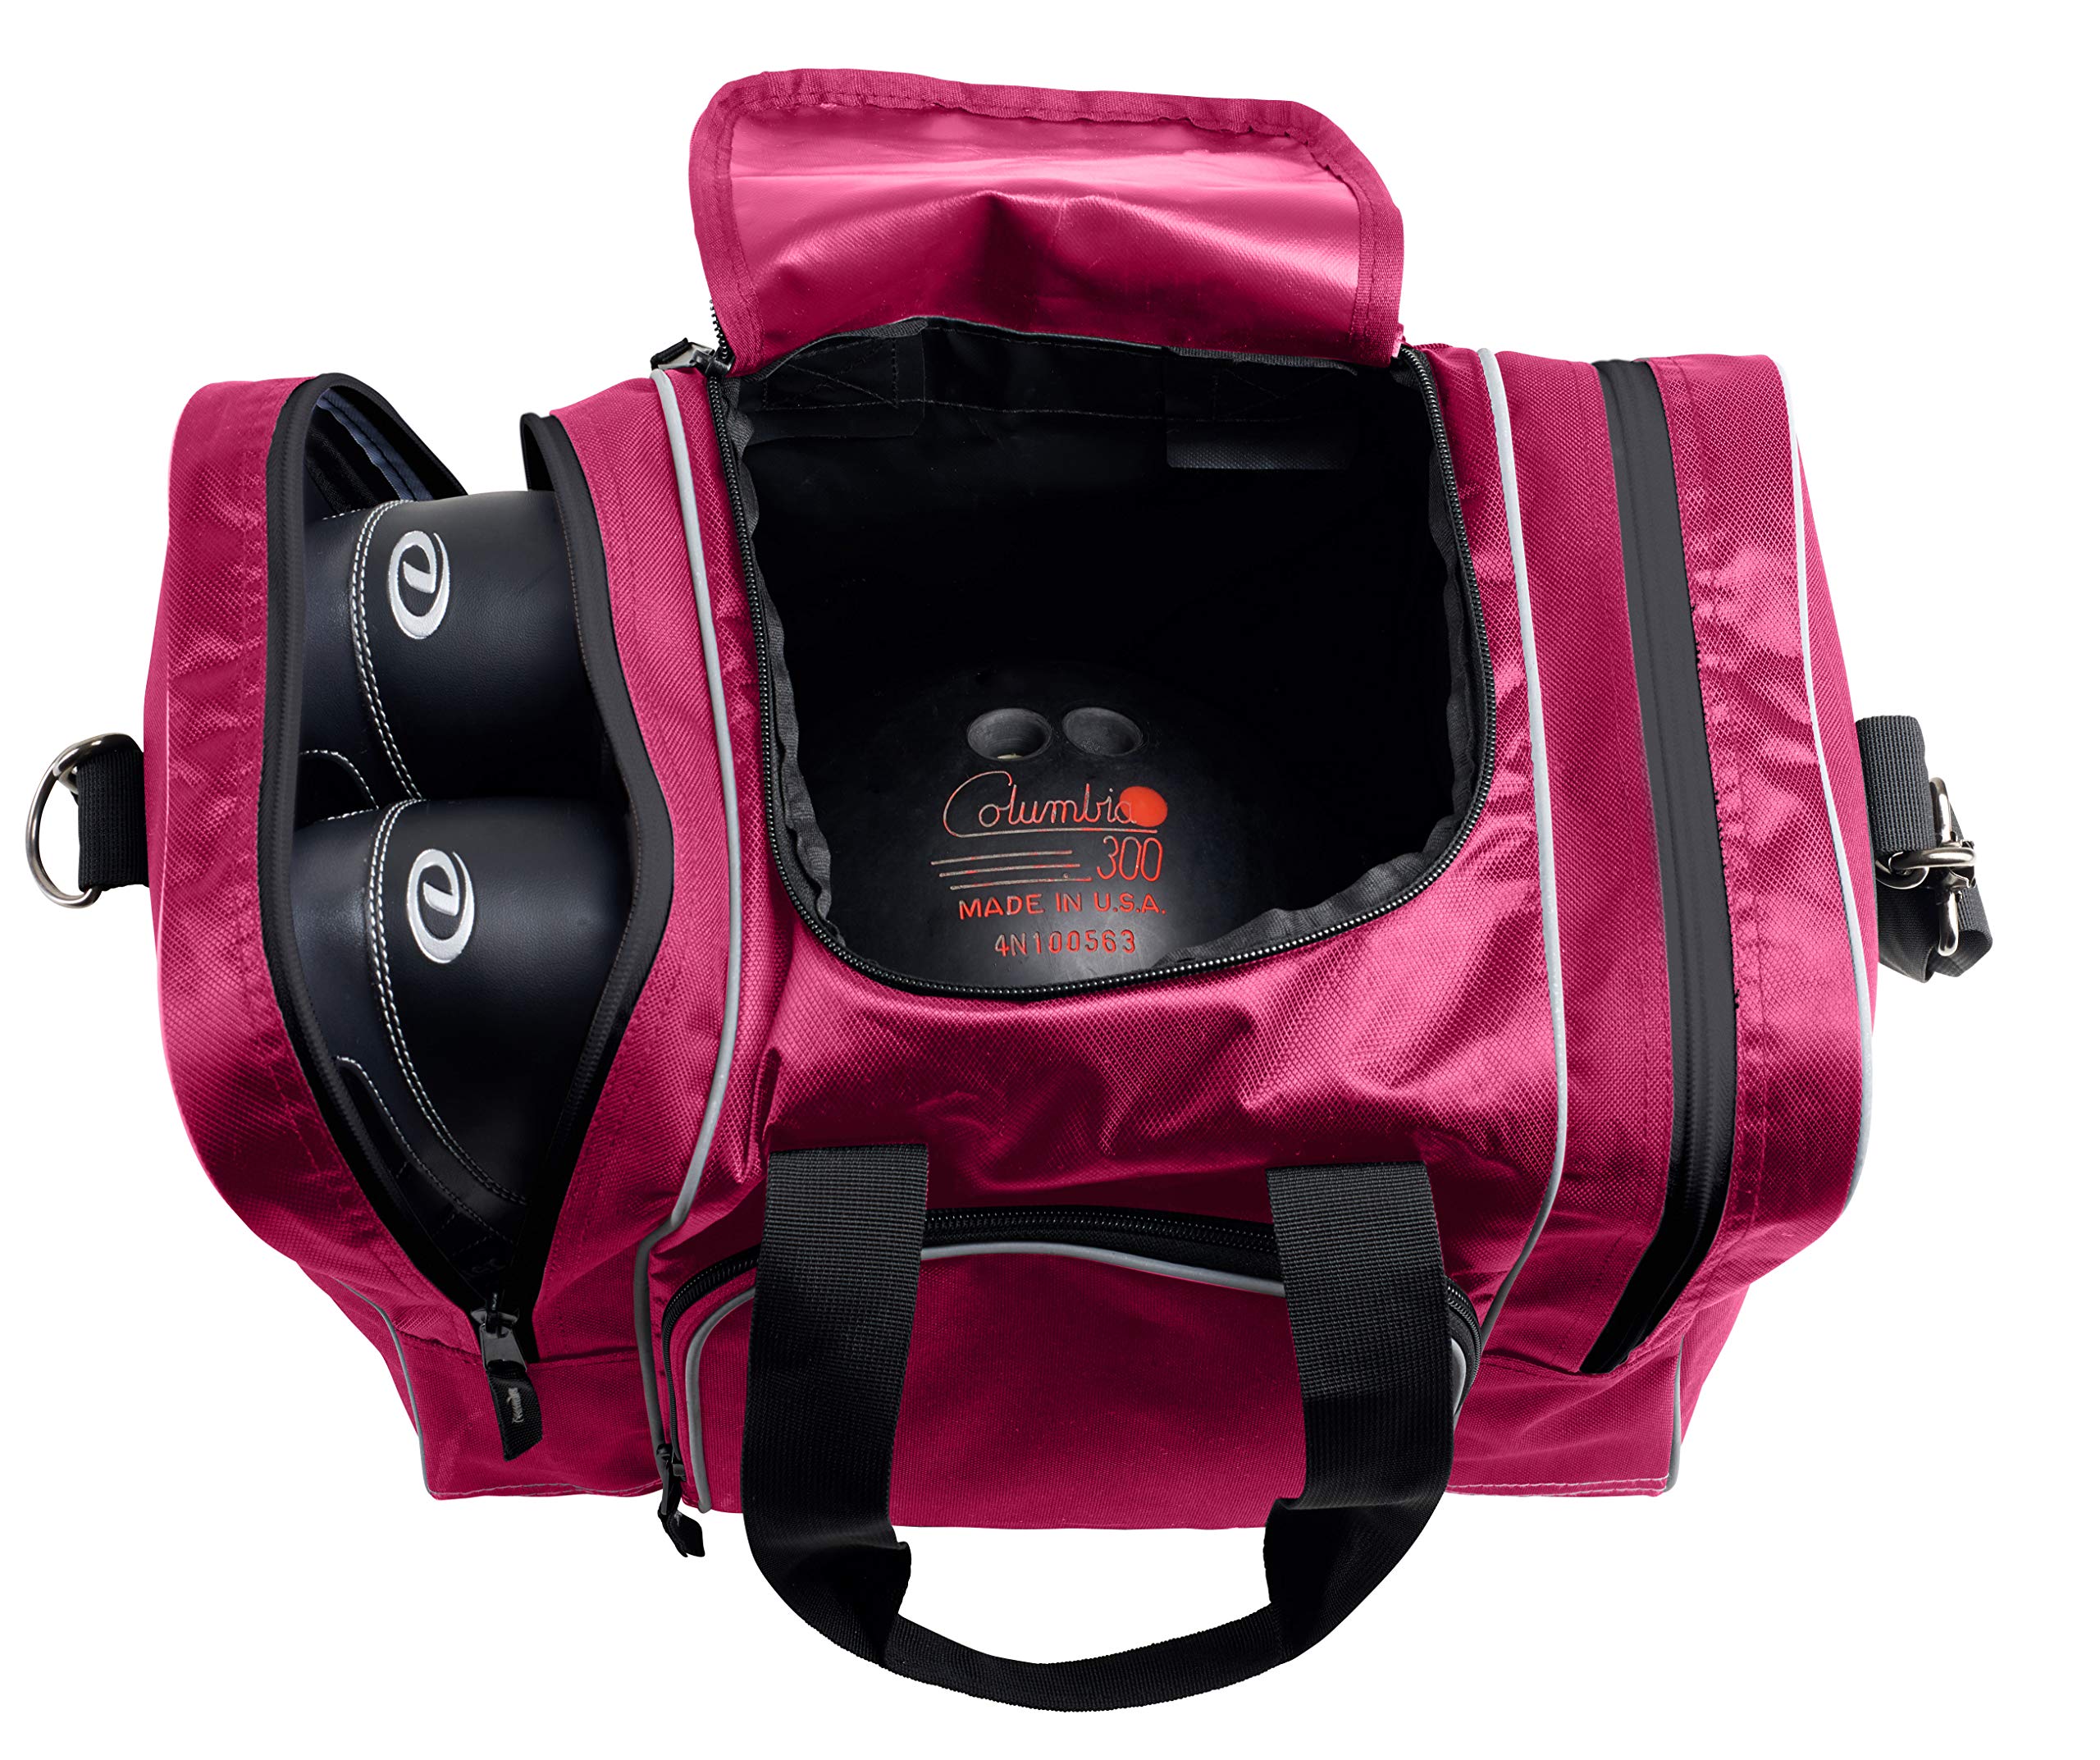 Athletico Bowling Bag for Single Ball - Single Ball Tote Bag With Padded Ball Holder - Fits a Single Pair of Bowling Shoes Up to Mens Size 14 (Pink)  - Very Good